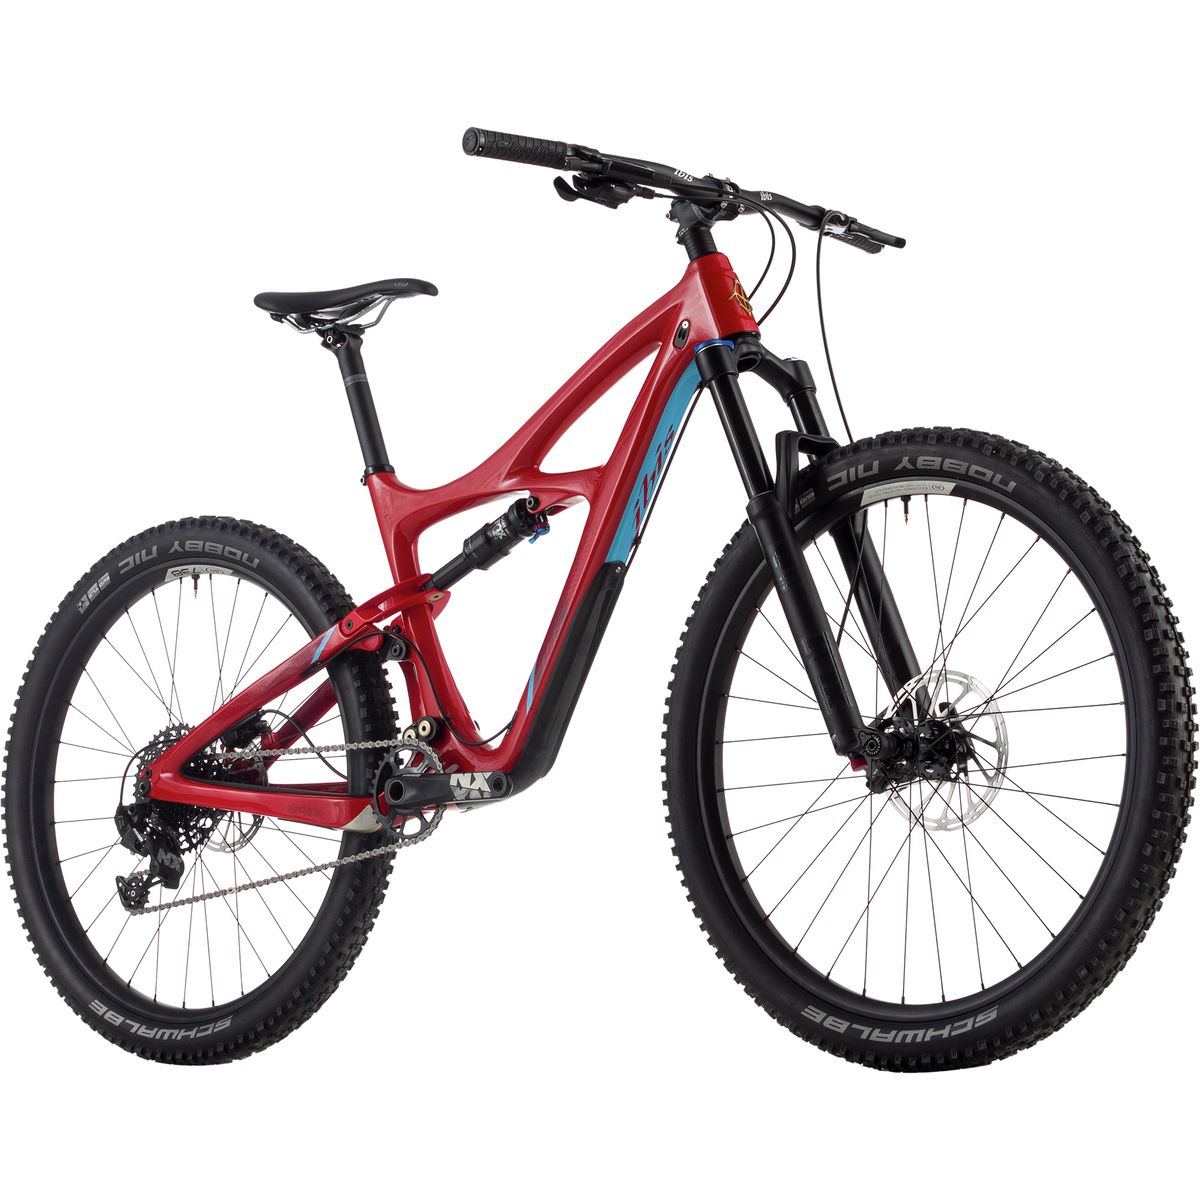 Ibis Mojo 3 Carbon Special Blend Complete Mountain Bike 2017